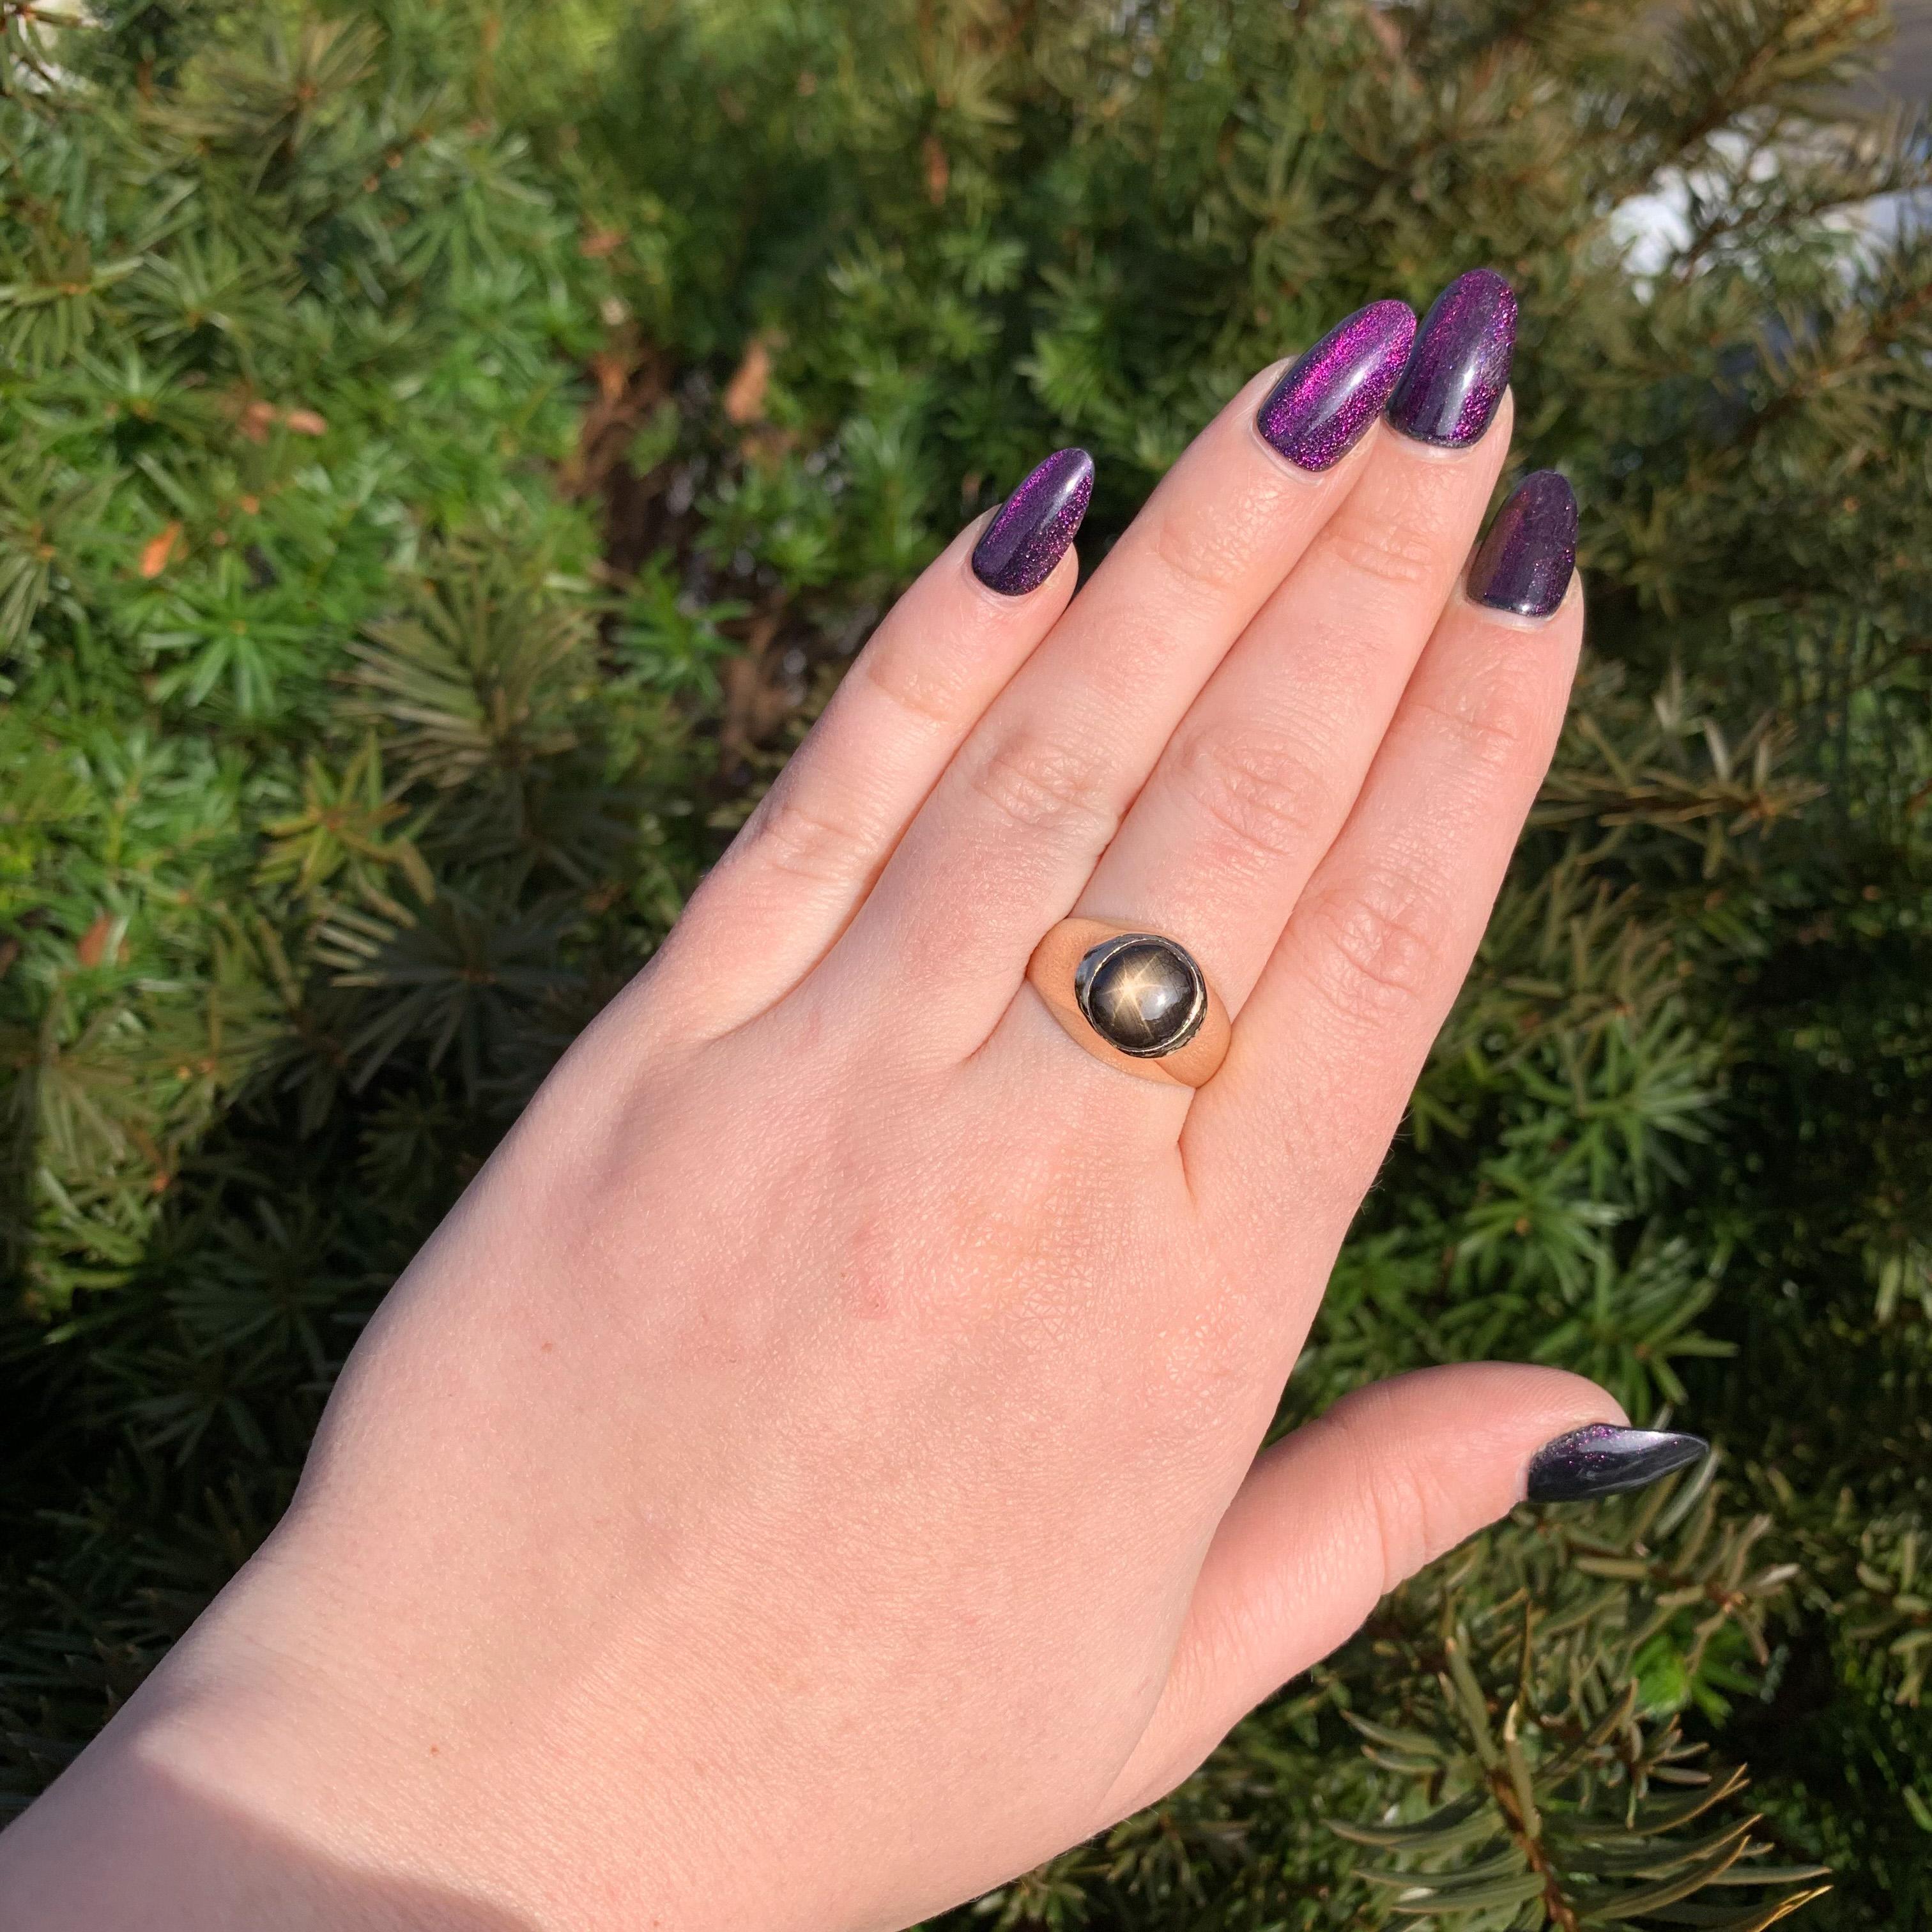 Vintage 18K yellow gold men's ring featuring an oval black star sapphire. The dark brown/black sapphire has a 6 rayed star and measures about 10mm x 8mm. The ring fits a size 9 finger, weighs 5.44dwt and dates from the 1950-60's.